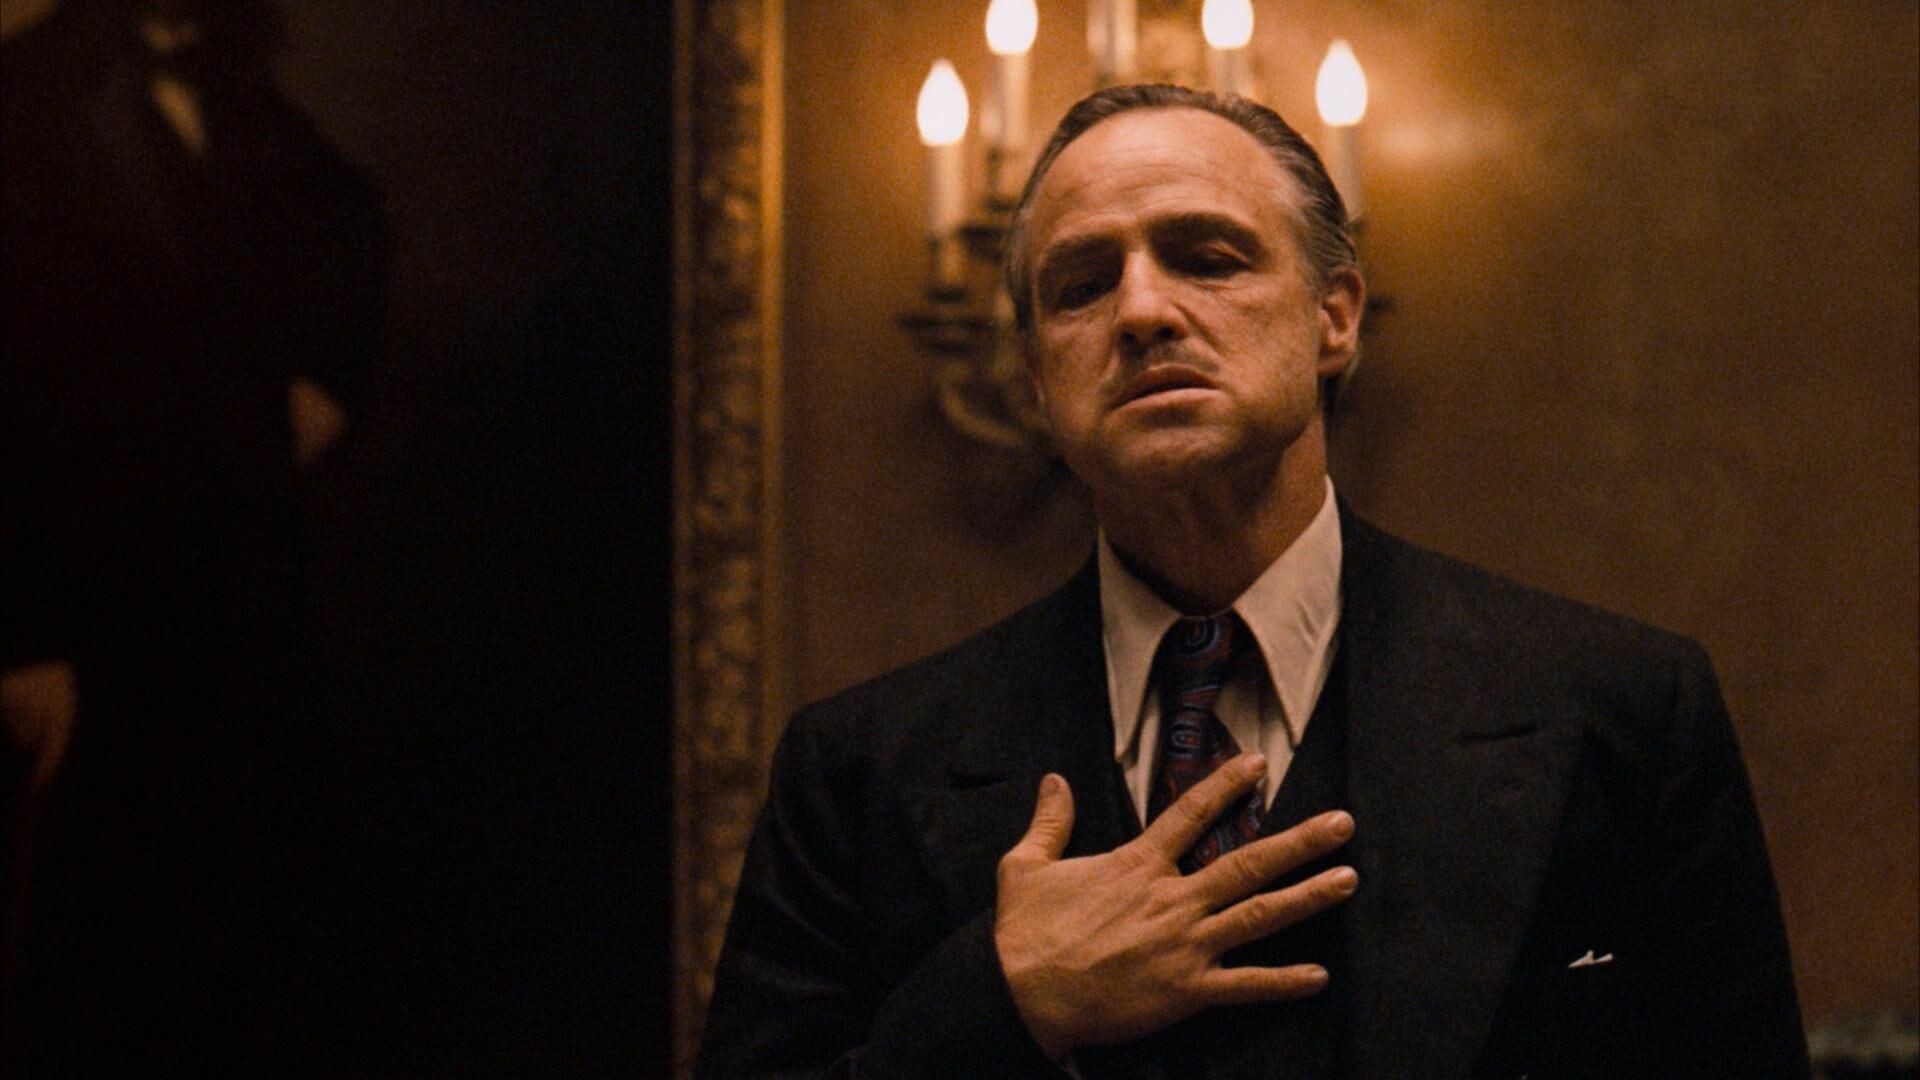 the godfather HD wallpapers, backgrounds